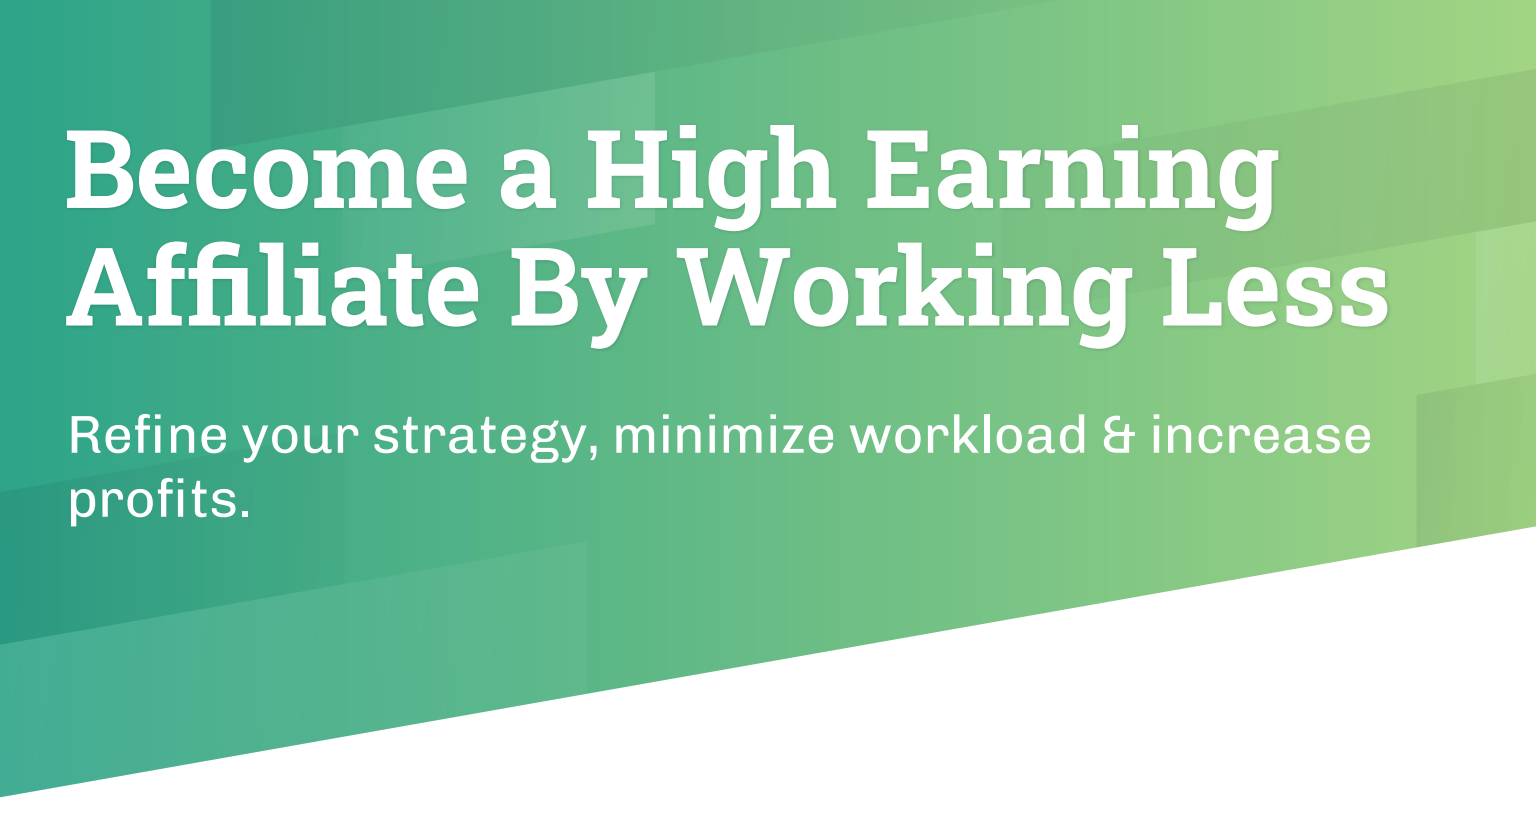 How To Become A High Earning Affiliate - Julie Adams